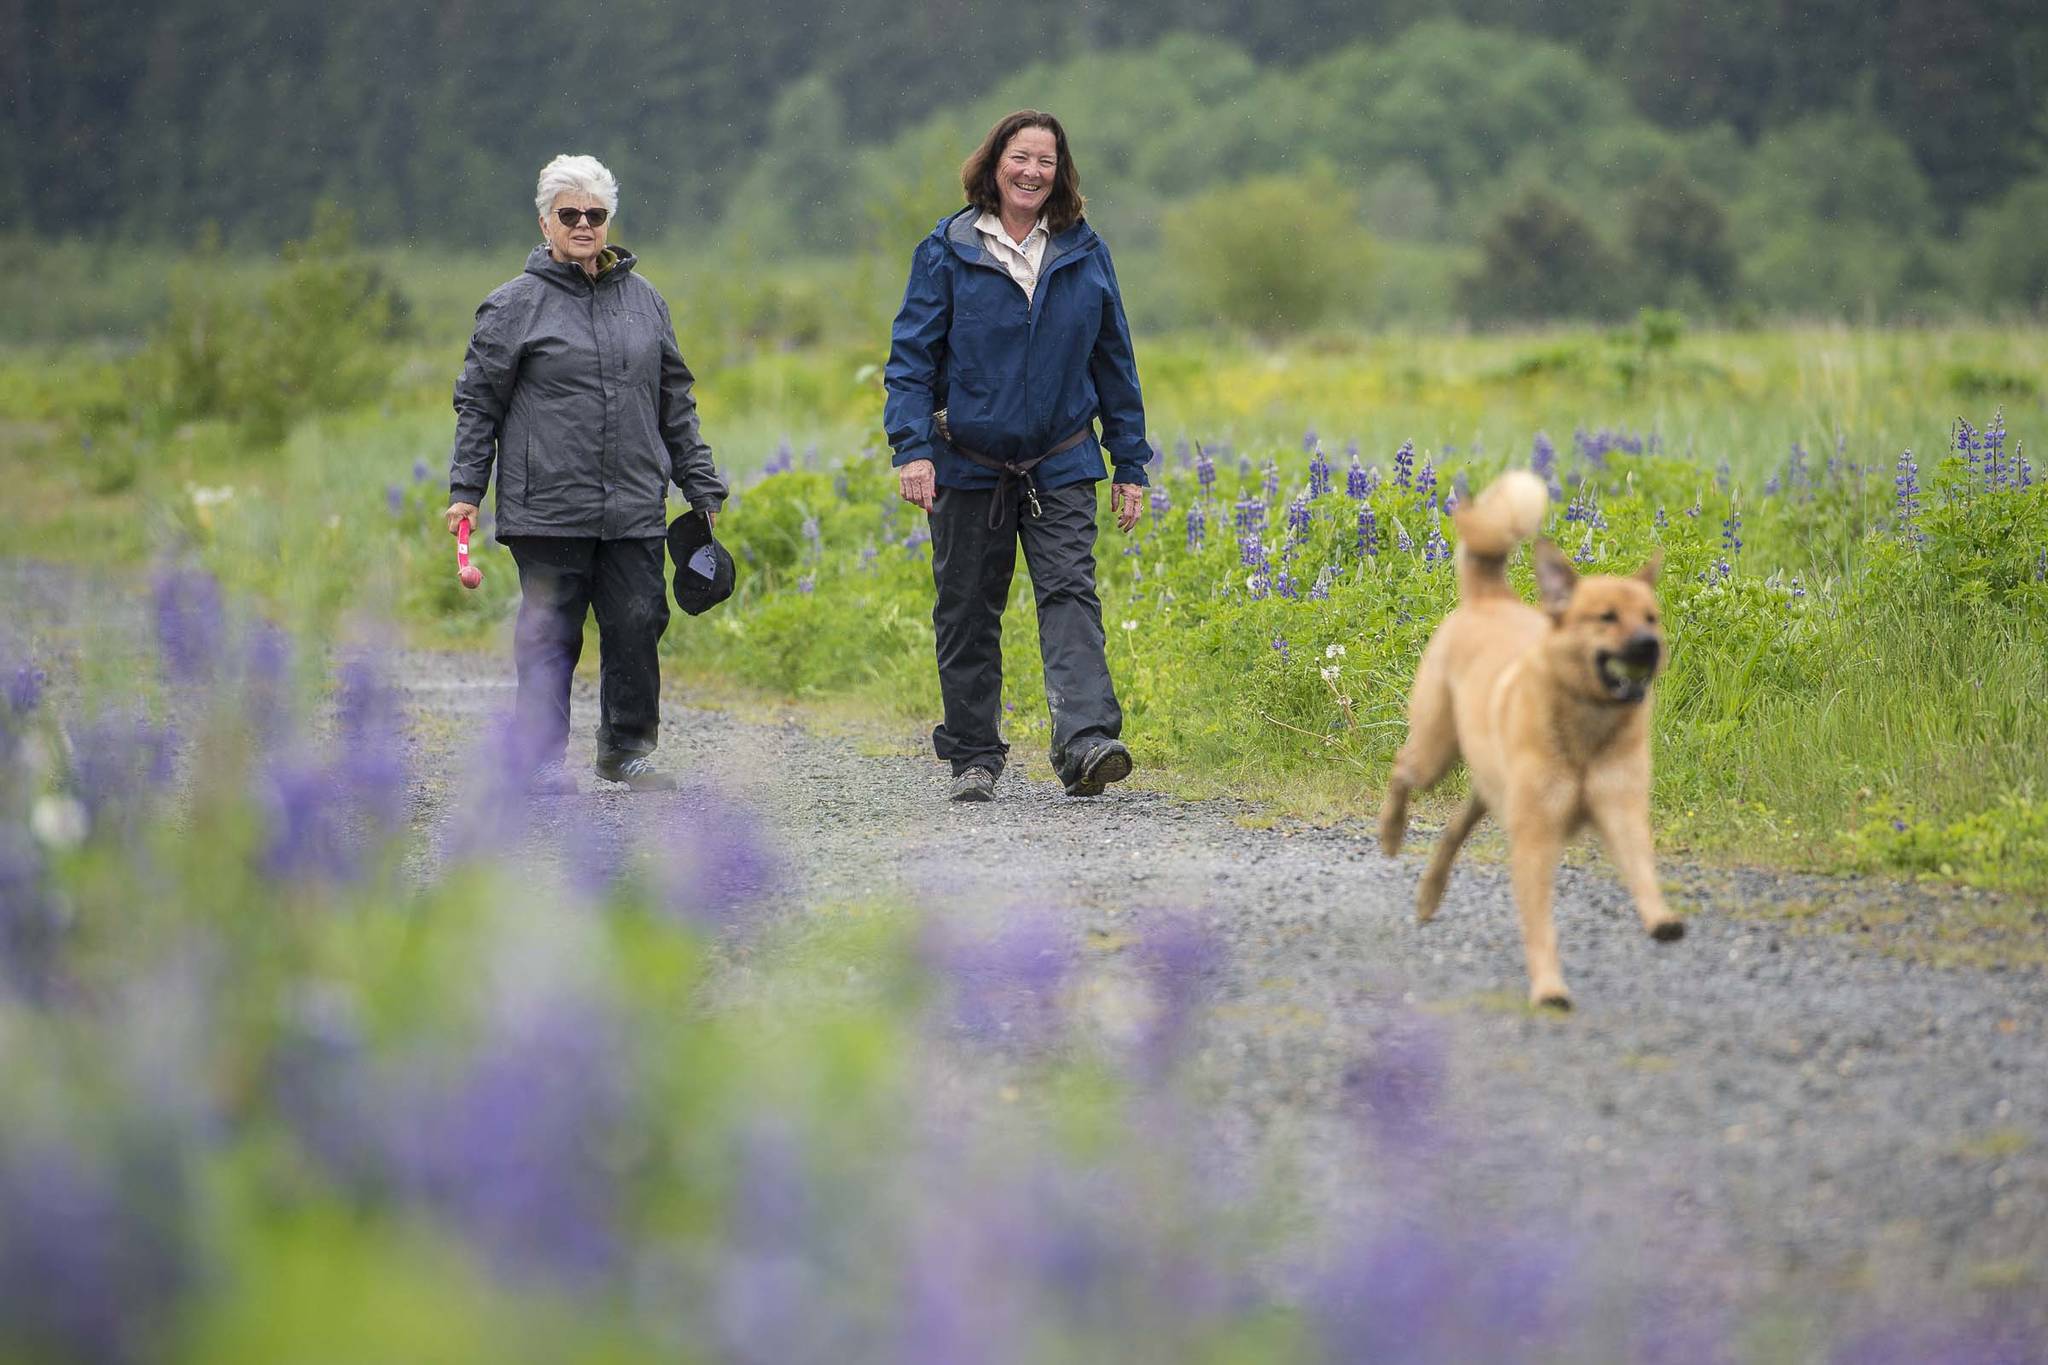 Surrounded by wildflowers, Kate McKelvey, left, and Mary Boas Hayes exercise Koa in the Mendenhall Wetlands State Game Refuge on Monday, June 3, 2019. (Michael Penn | Juneau Empire)